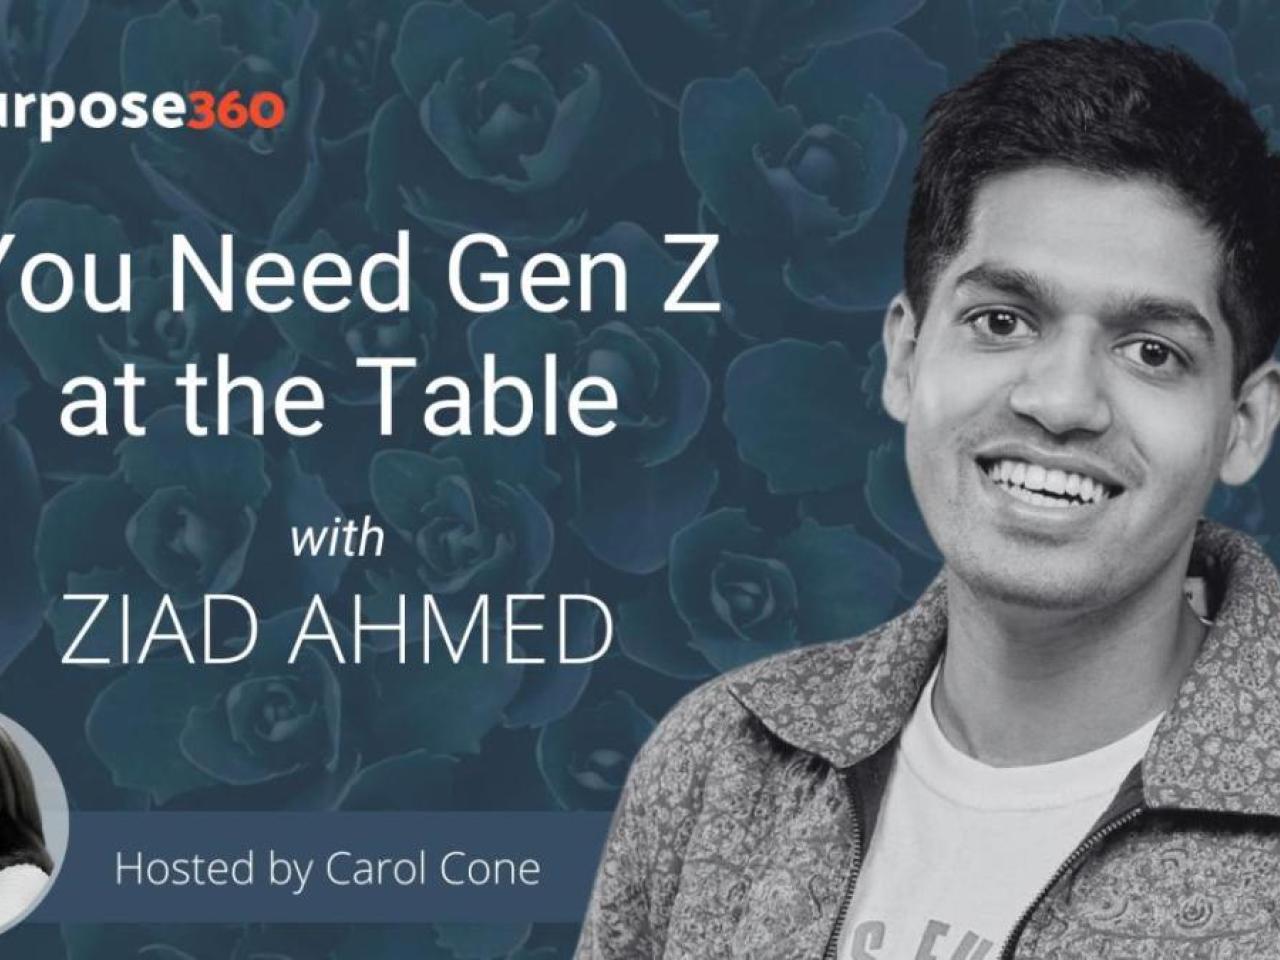 Podcast guest Ziad Ahmed